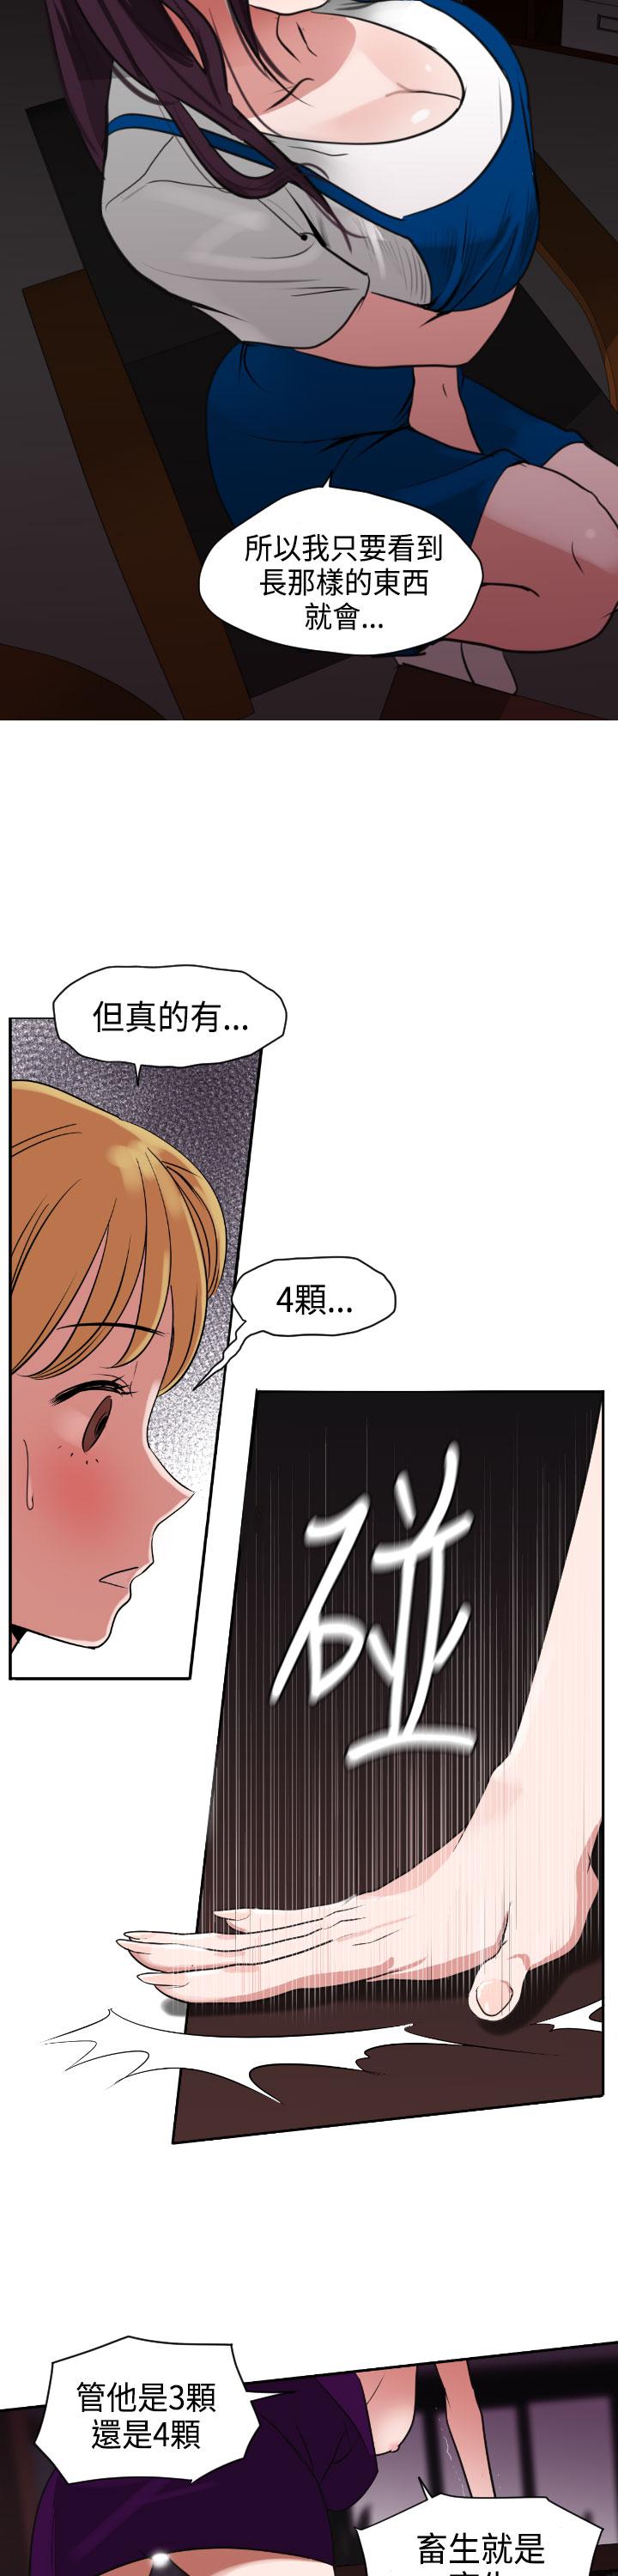 Desire King (慾求王) Ch.1-4 (chinese) 105